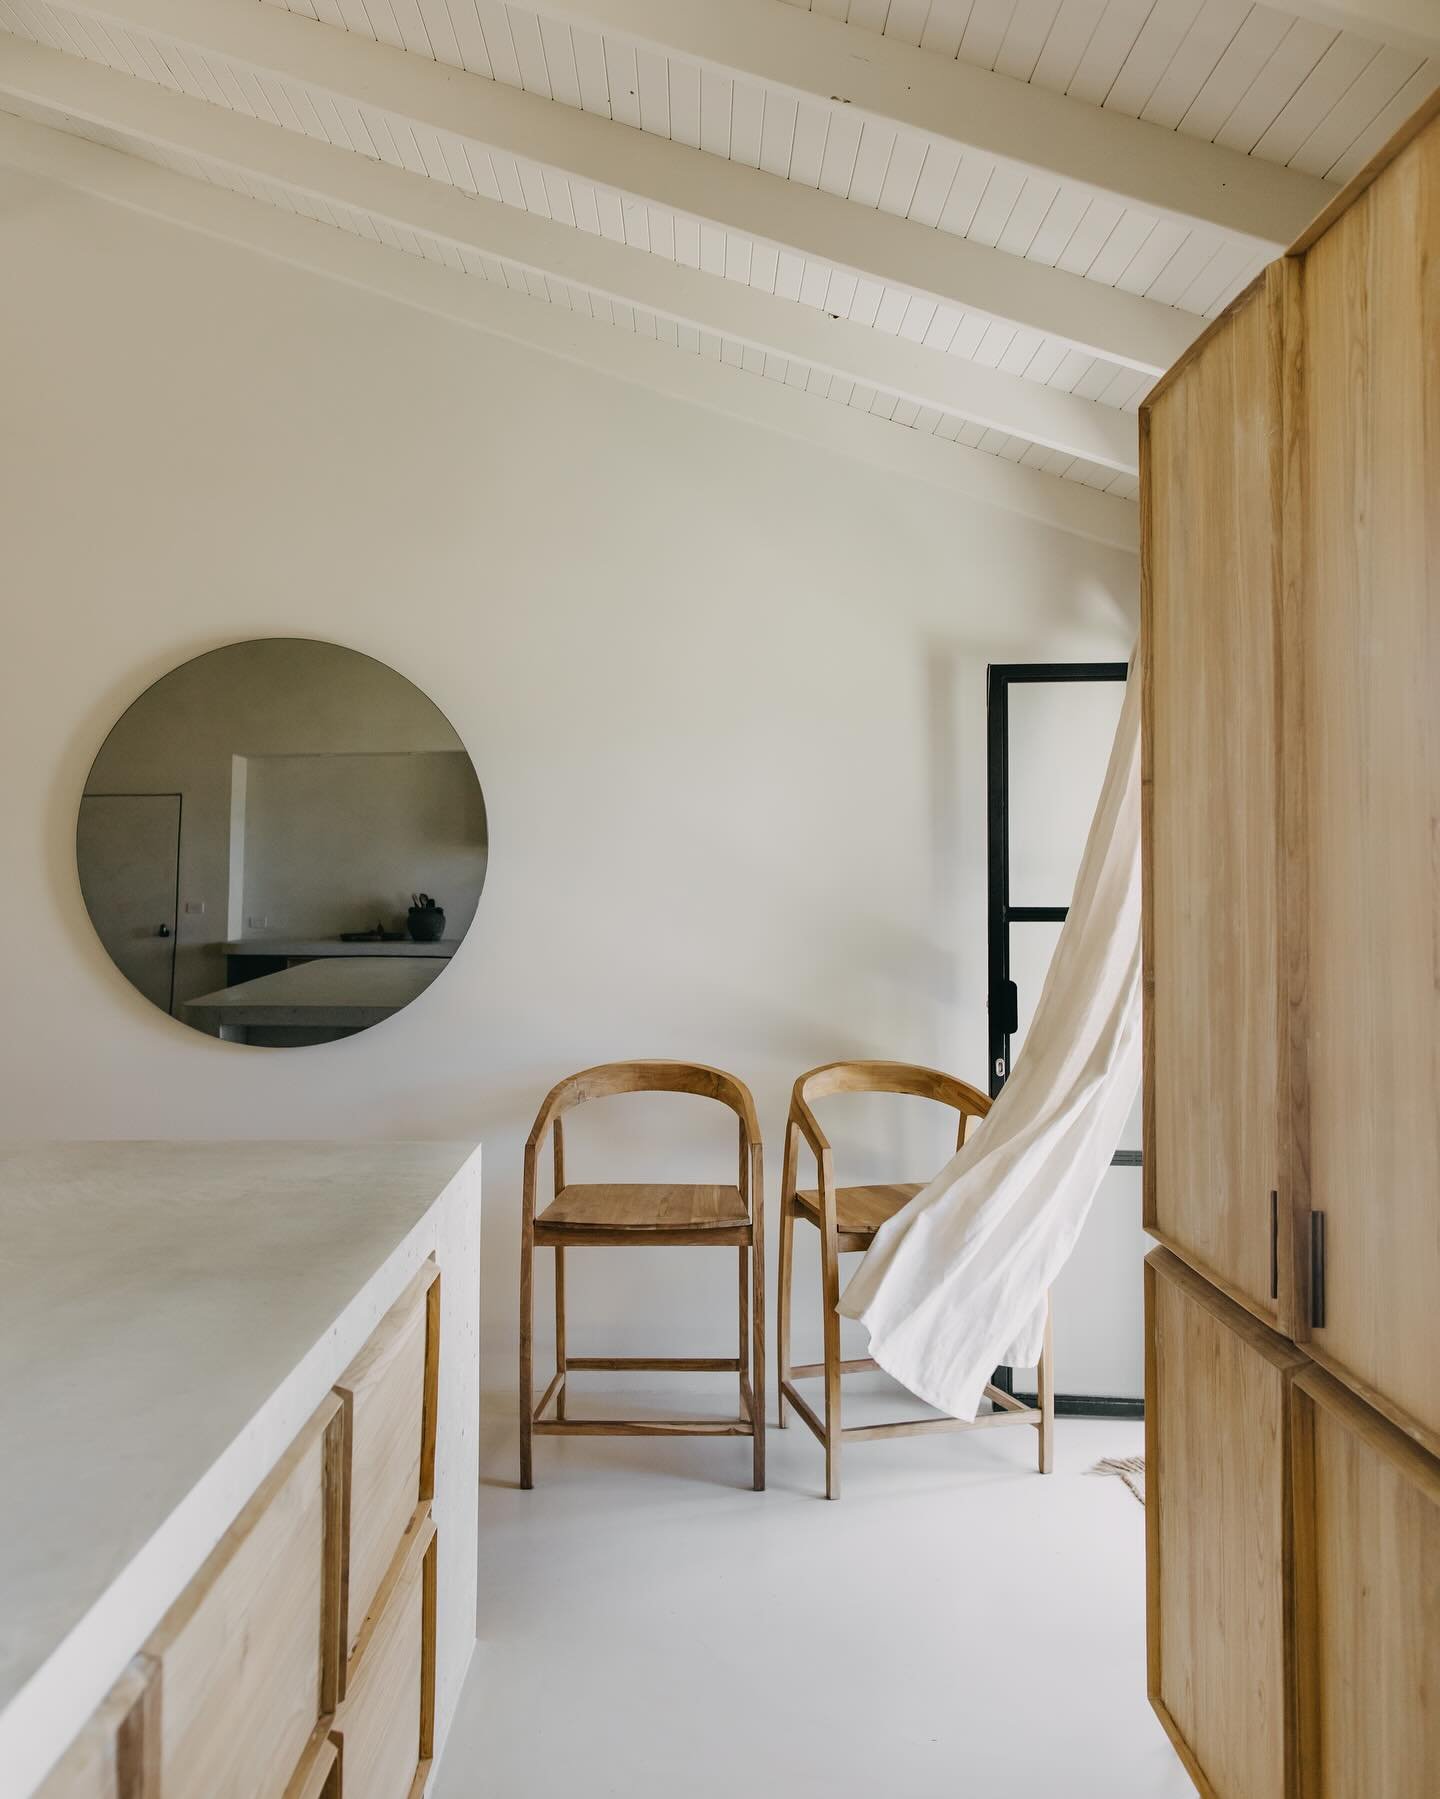 I love when spaces, objects and the light are in perfect synergy. Stay @sur_isle a private residence on the doorstep of Busselton. Wooden furniture by @we_wabi.